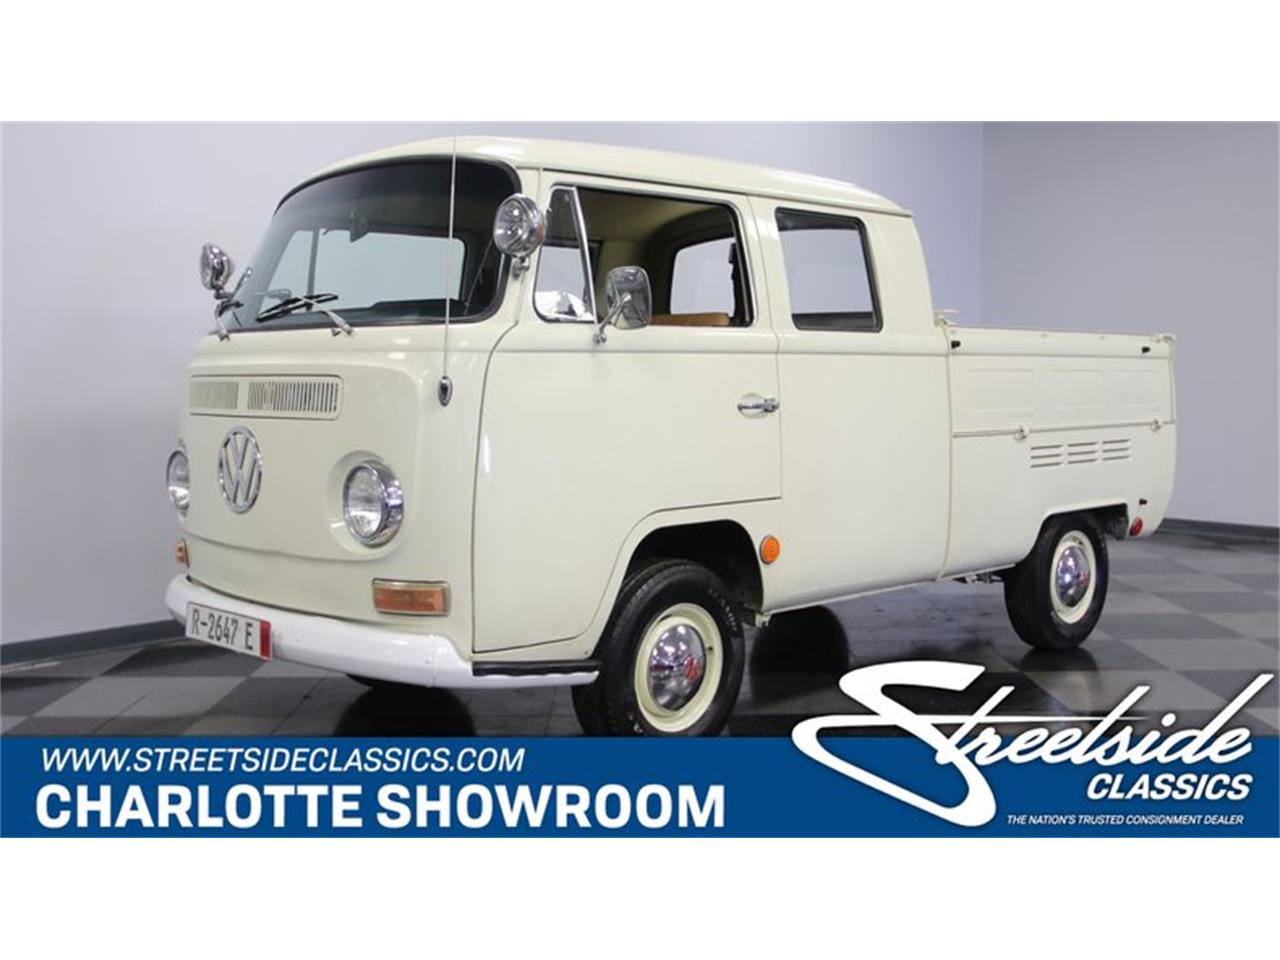 1968 Volkswagen Transporter for sale in Concord, NC